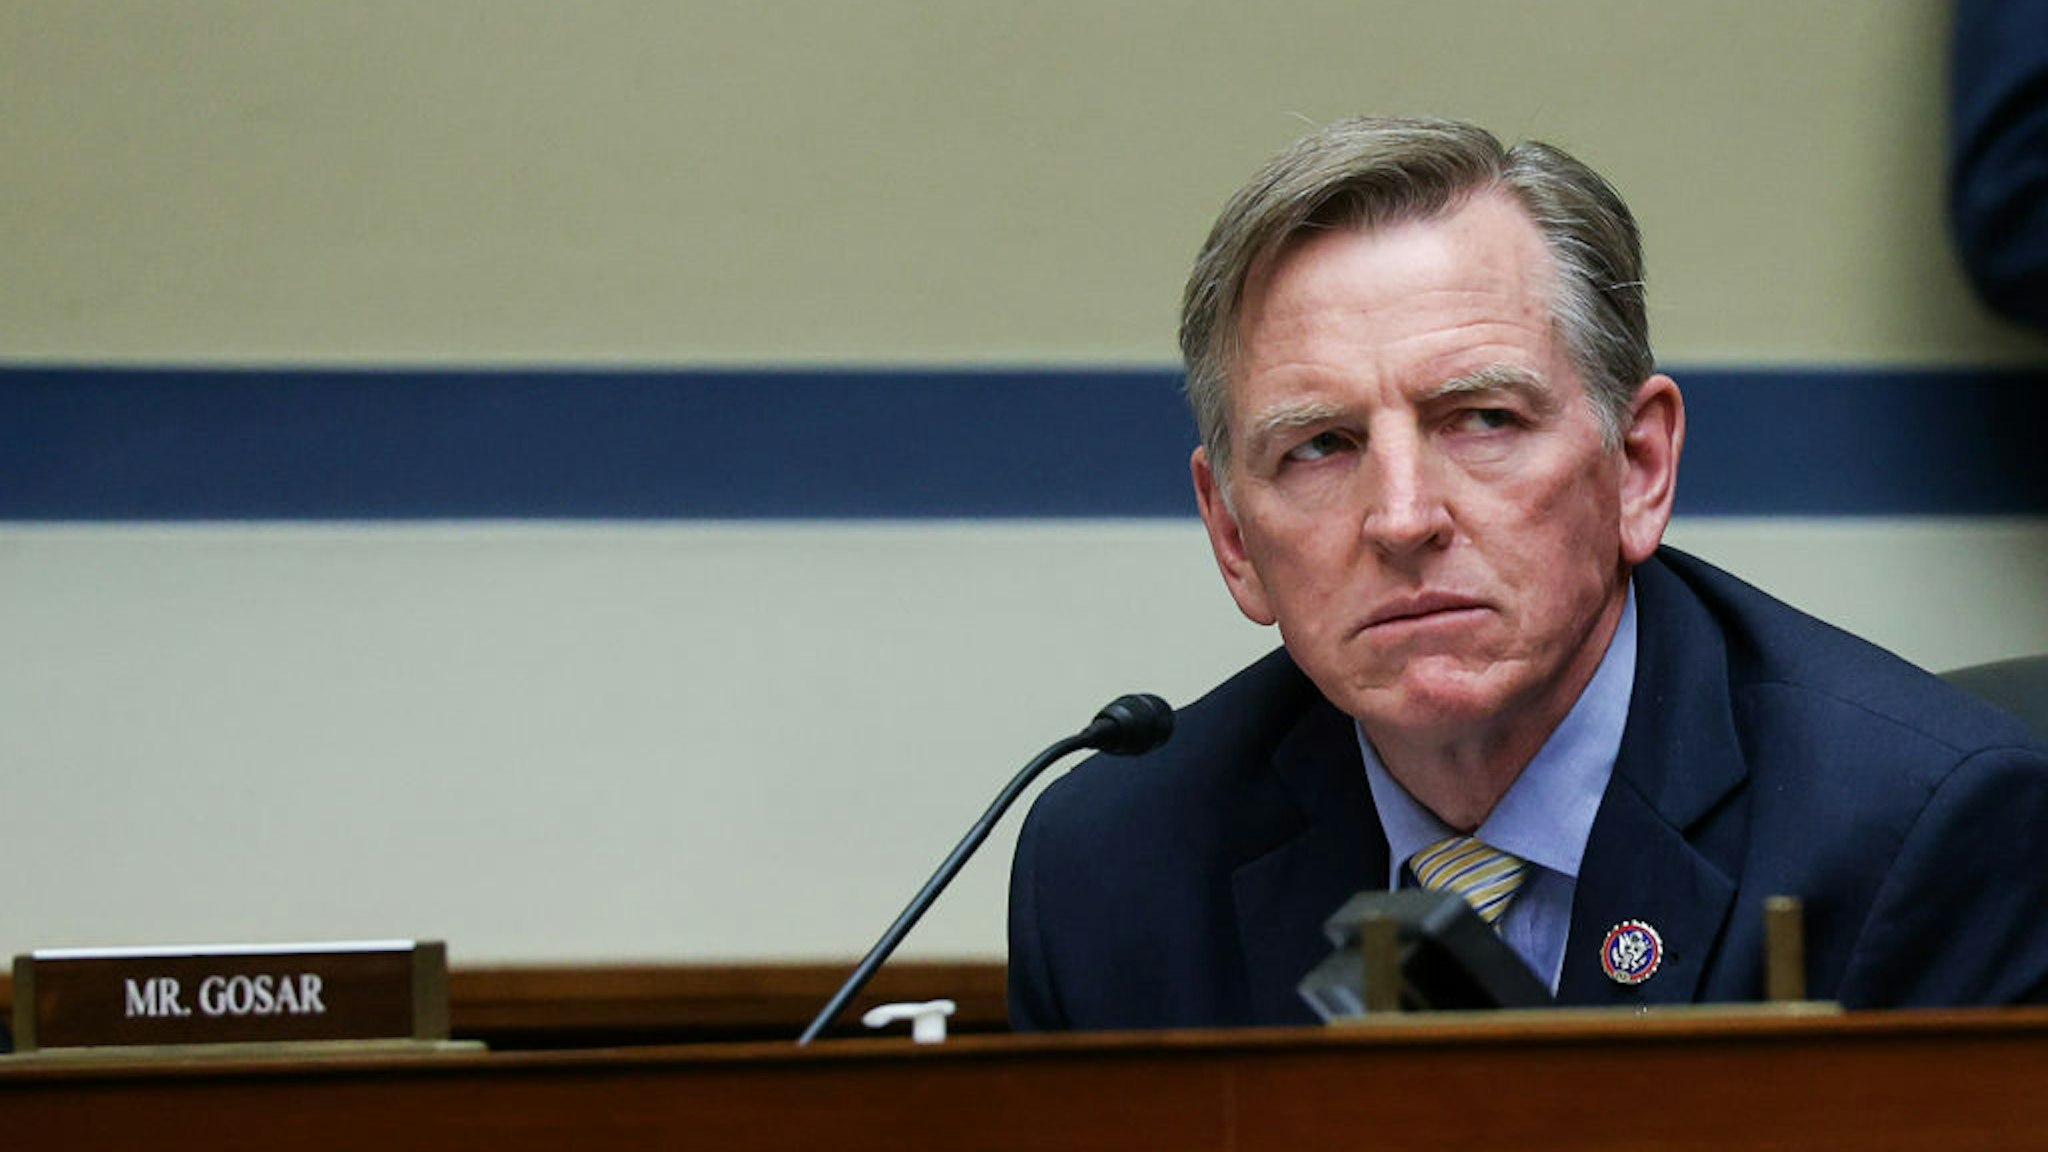 WASHINGTON, DC - MAY 12: Rep. Paul Gosar (R-AZ) attends a House Oversight and Reform Committee hearing titled The Capitol Insurrection: Unexplained Delays and Unanswered Questions, on Capitol Hill on May 12, 2021 in Washington, DC. The committee will hear testimony about delays in law enforcement response during the January 6 attack on the U.S. Capitol.